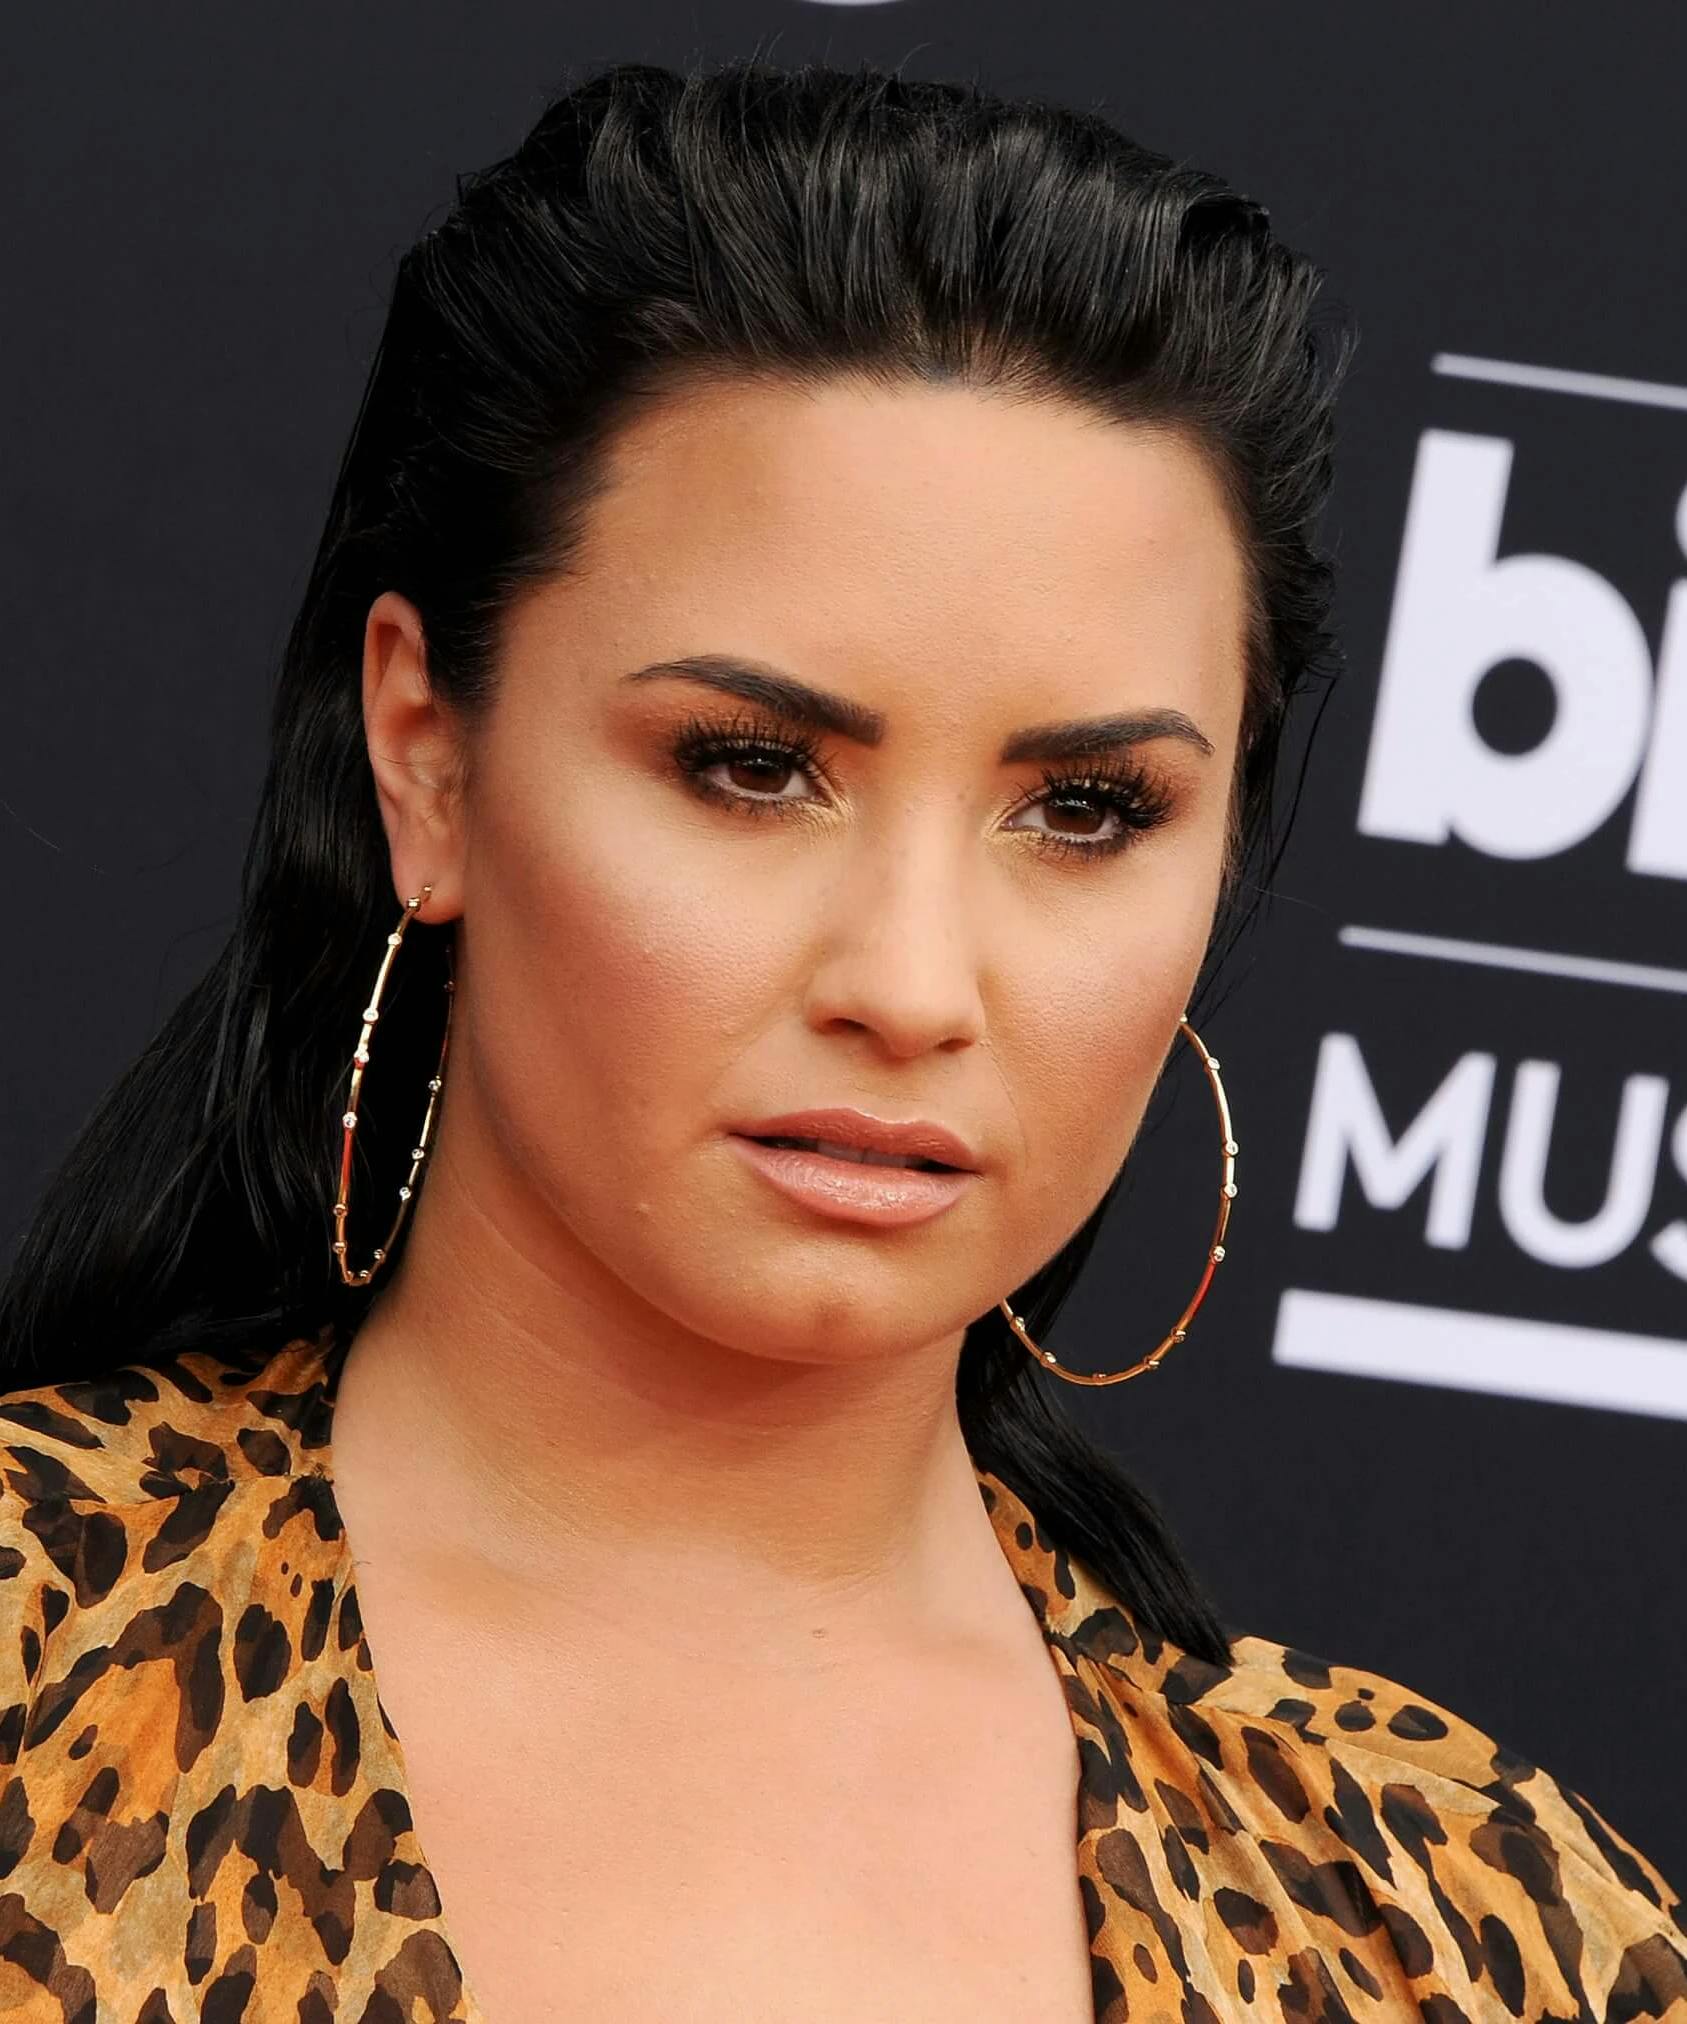 Demi Lovato Punches Down At A Small Business During The Pandemic